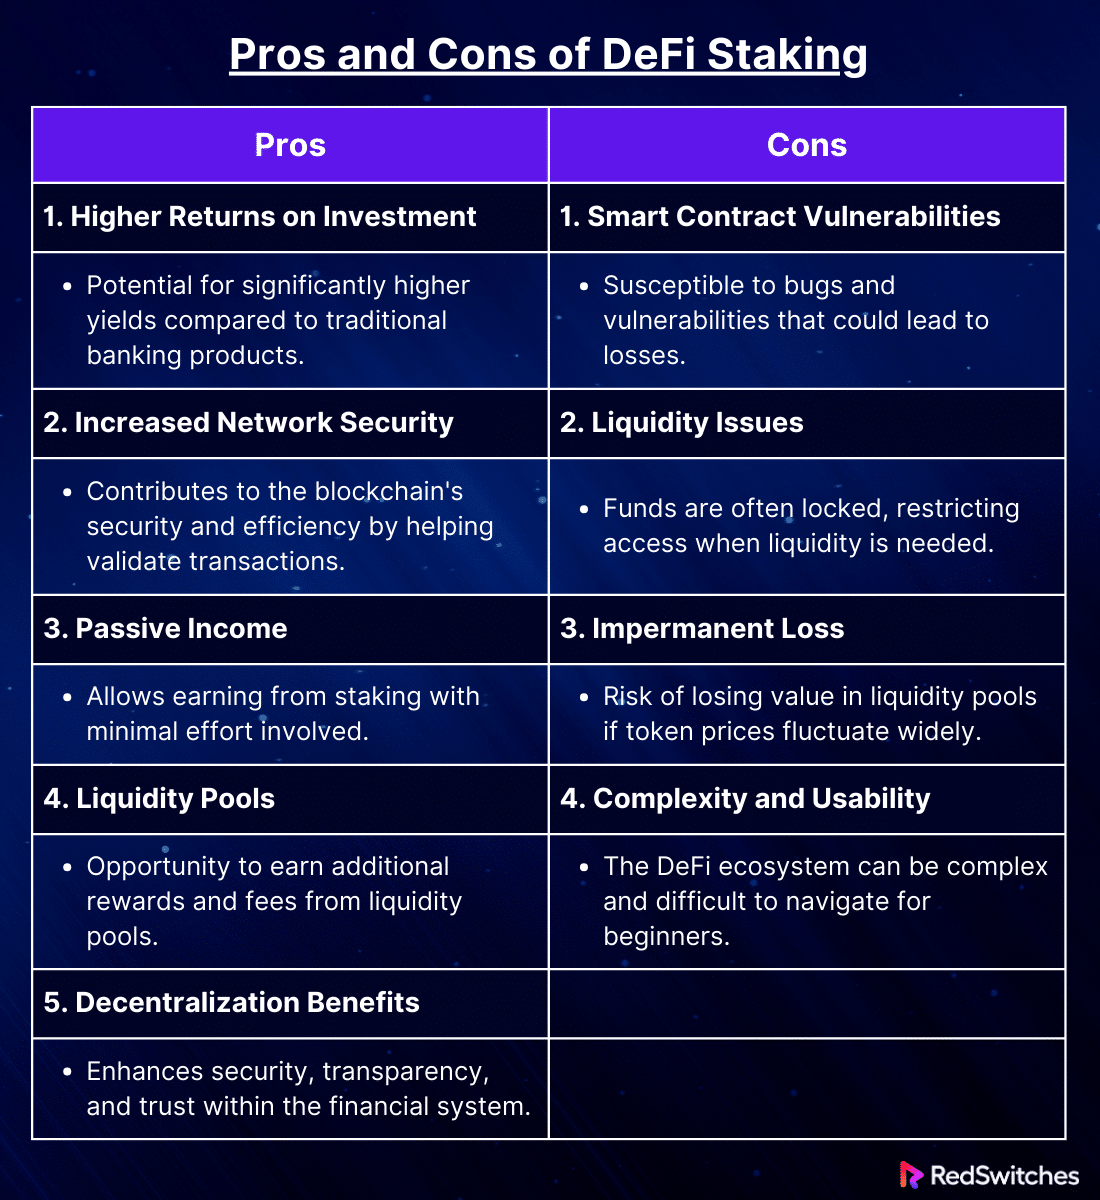 Pros and Cons of DeFi staking